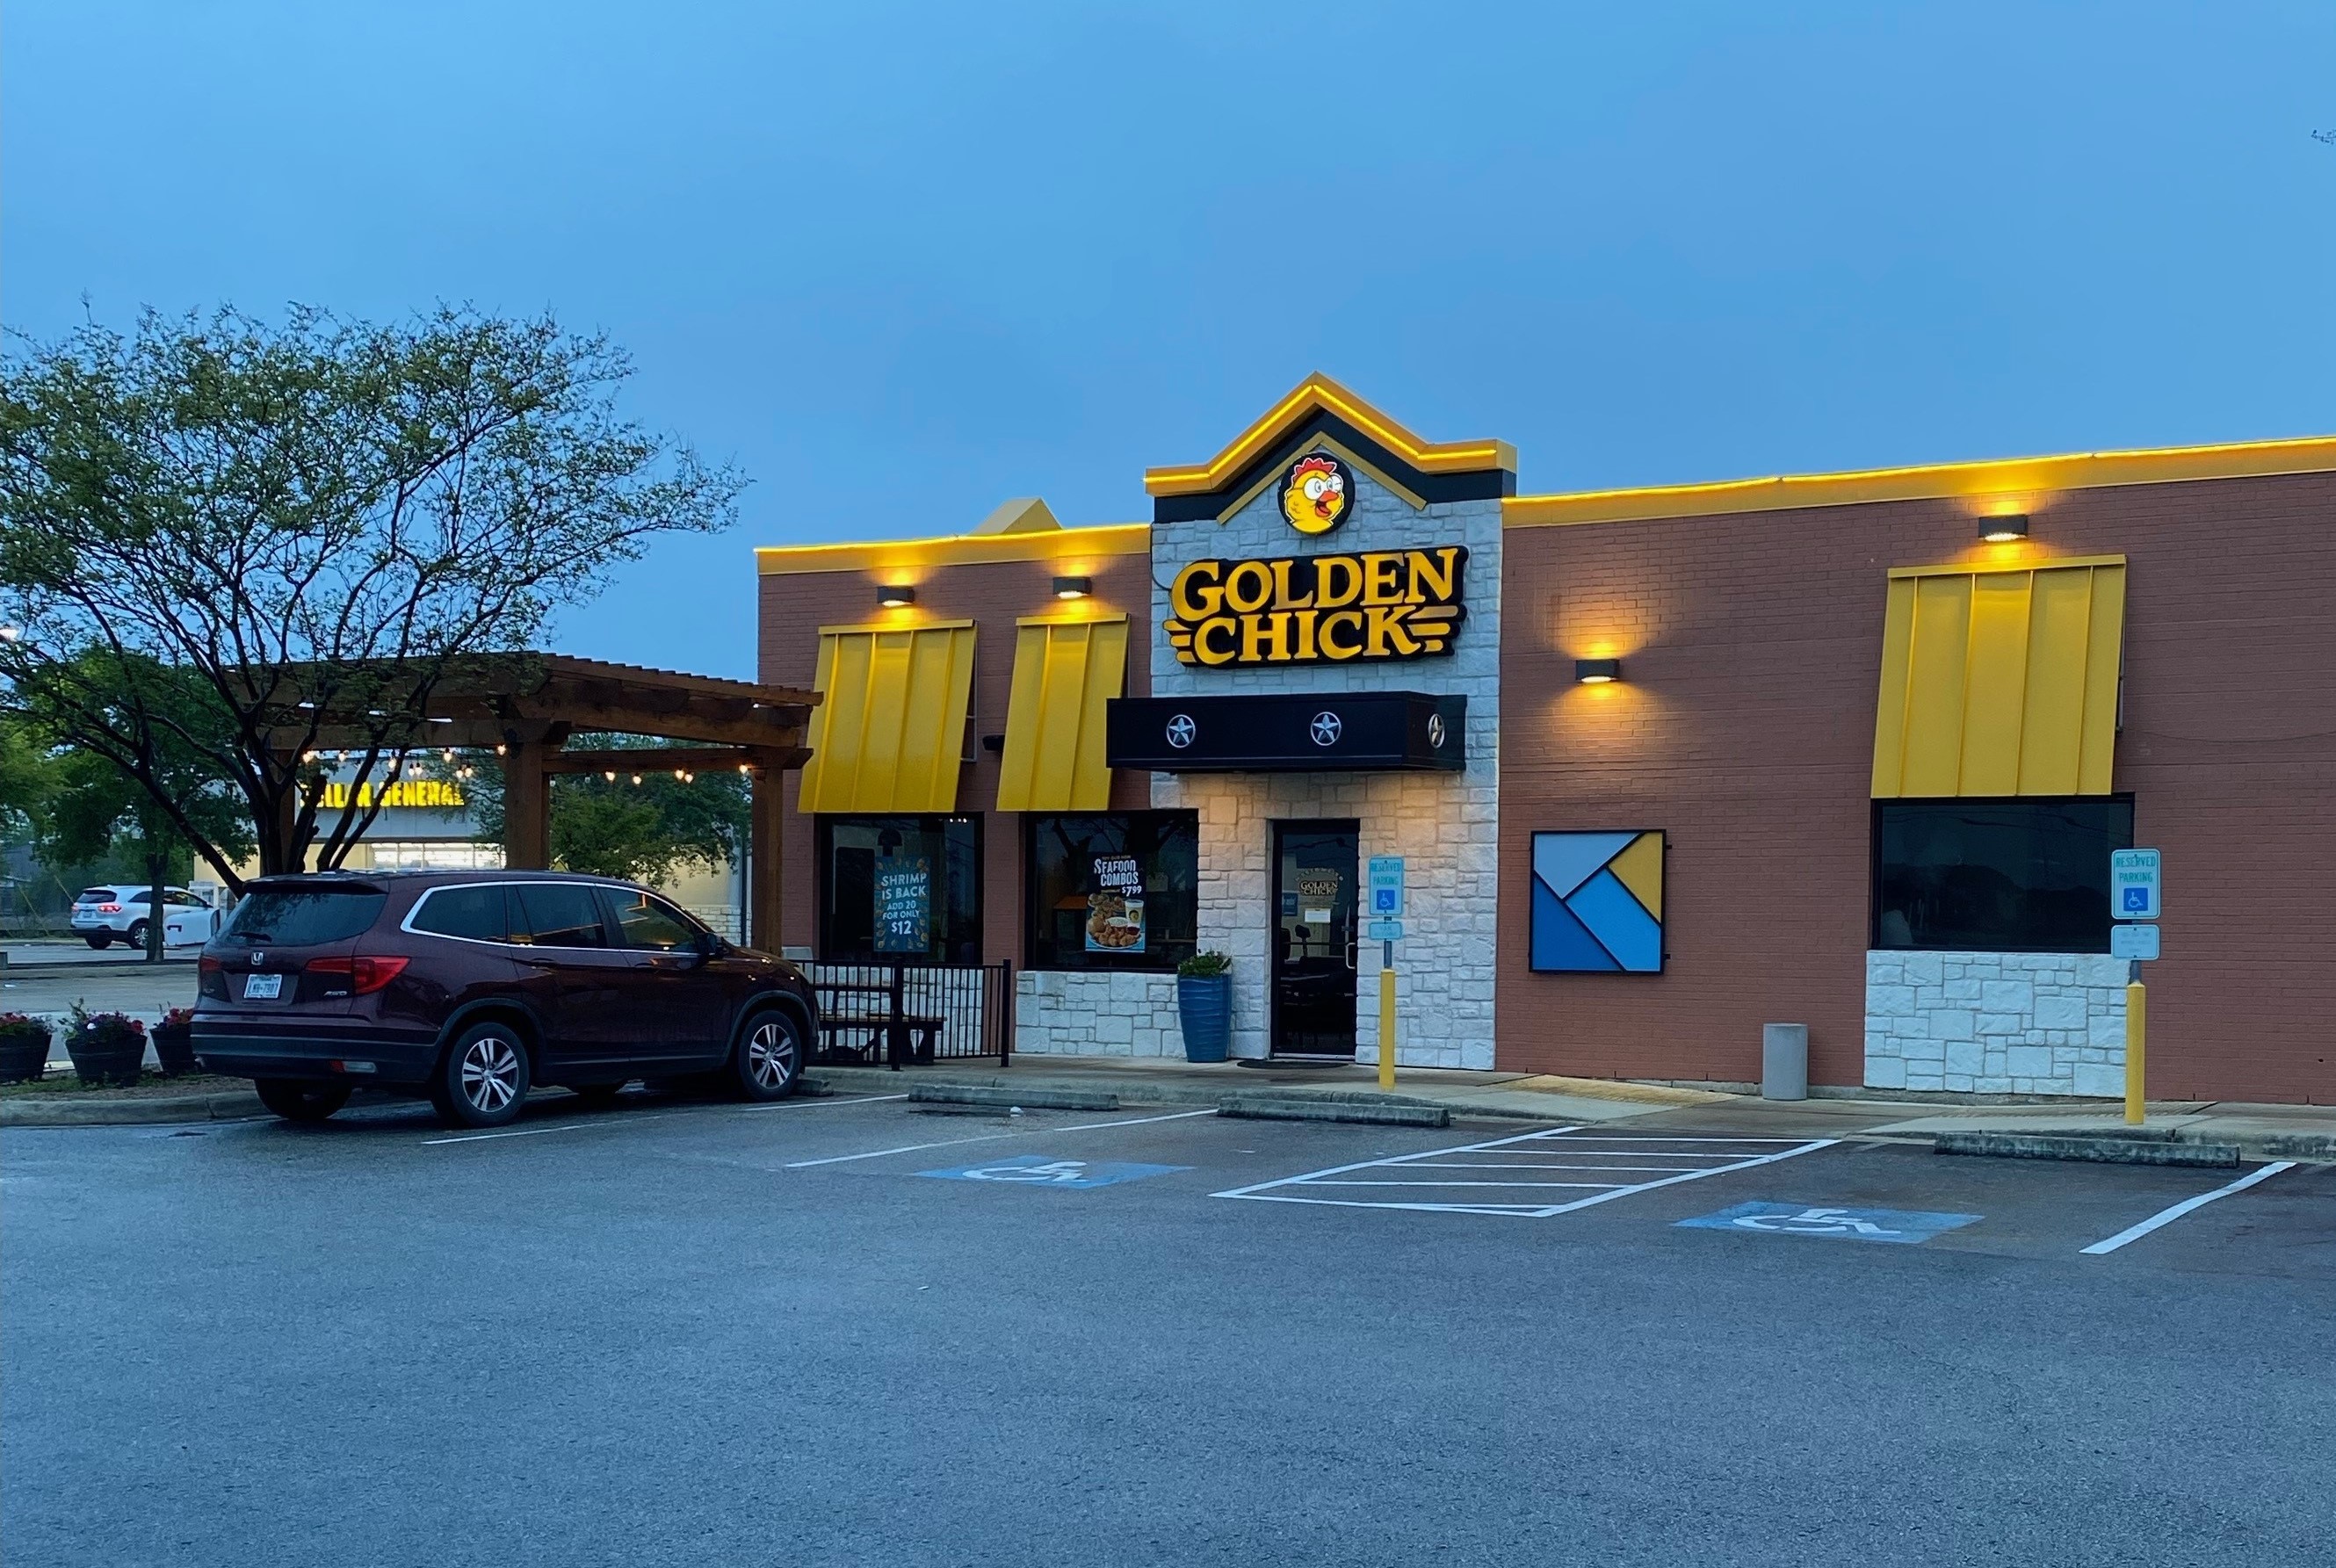 Golden Chick storefront.  Your local Golden Chick fast food restaurant in Kyle, Texas